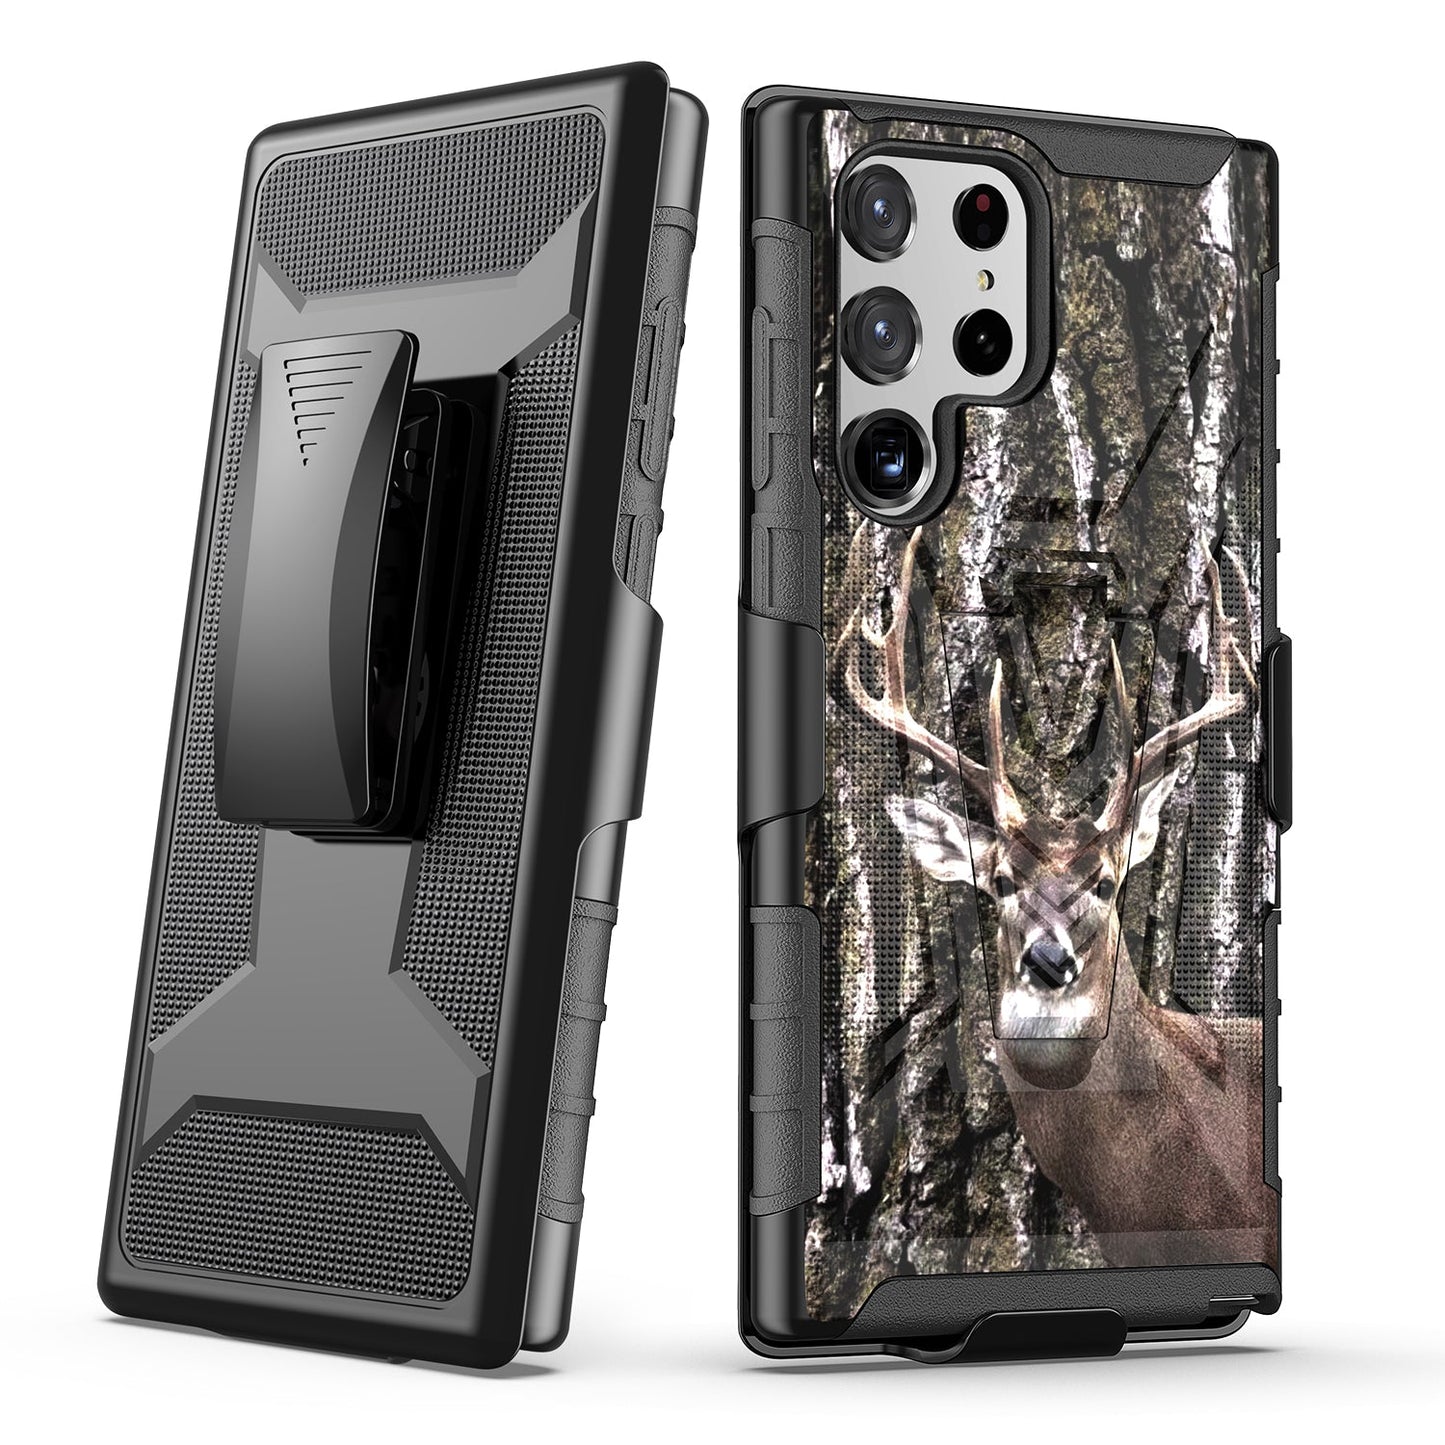 Case For Samsung Galaxy S22 ULTRA - Holster Clip Case Combo Phone Cover - Whitetail Buck